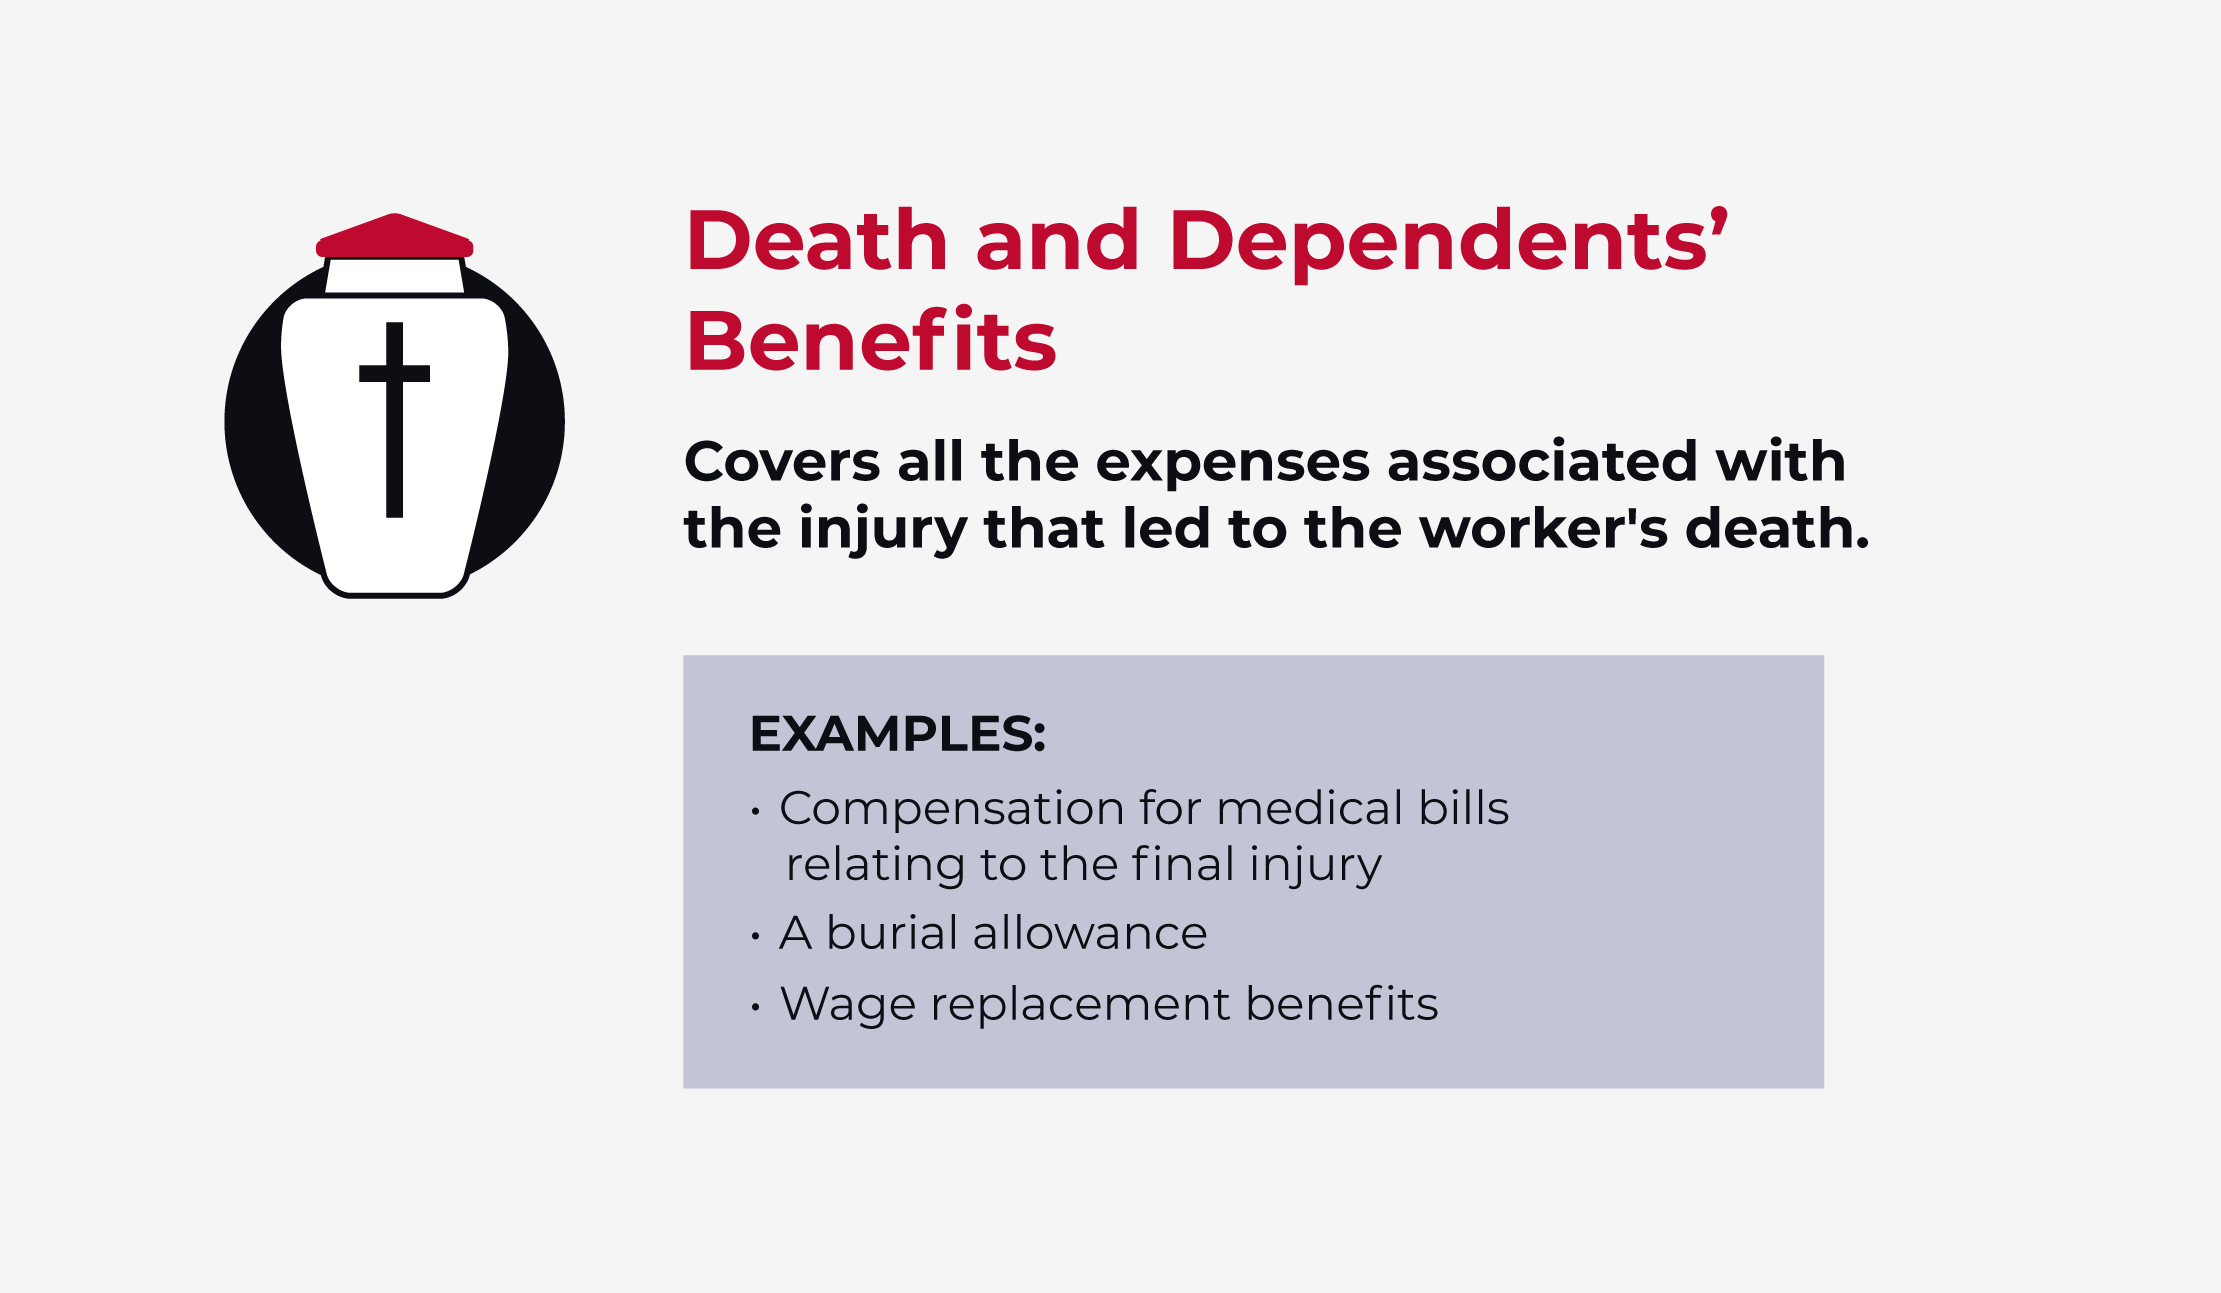 death and dependents' benefits